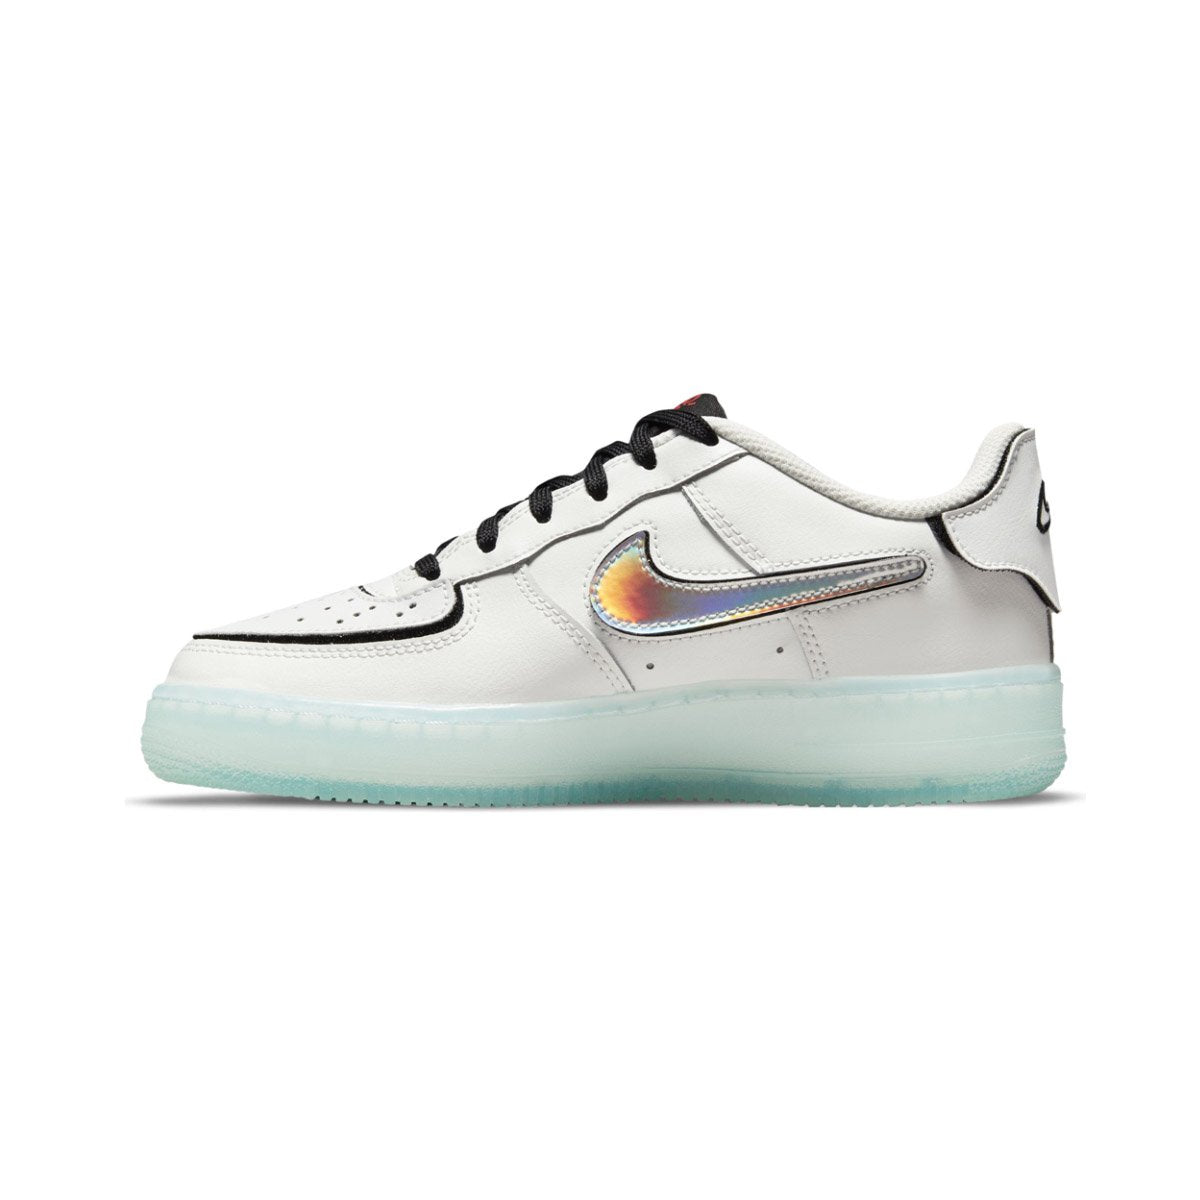 Nike air force 1 (1/1) with removable patches, Women's Fashion